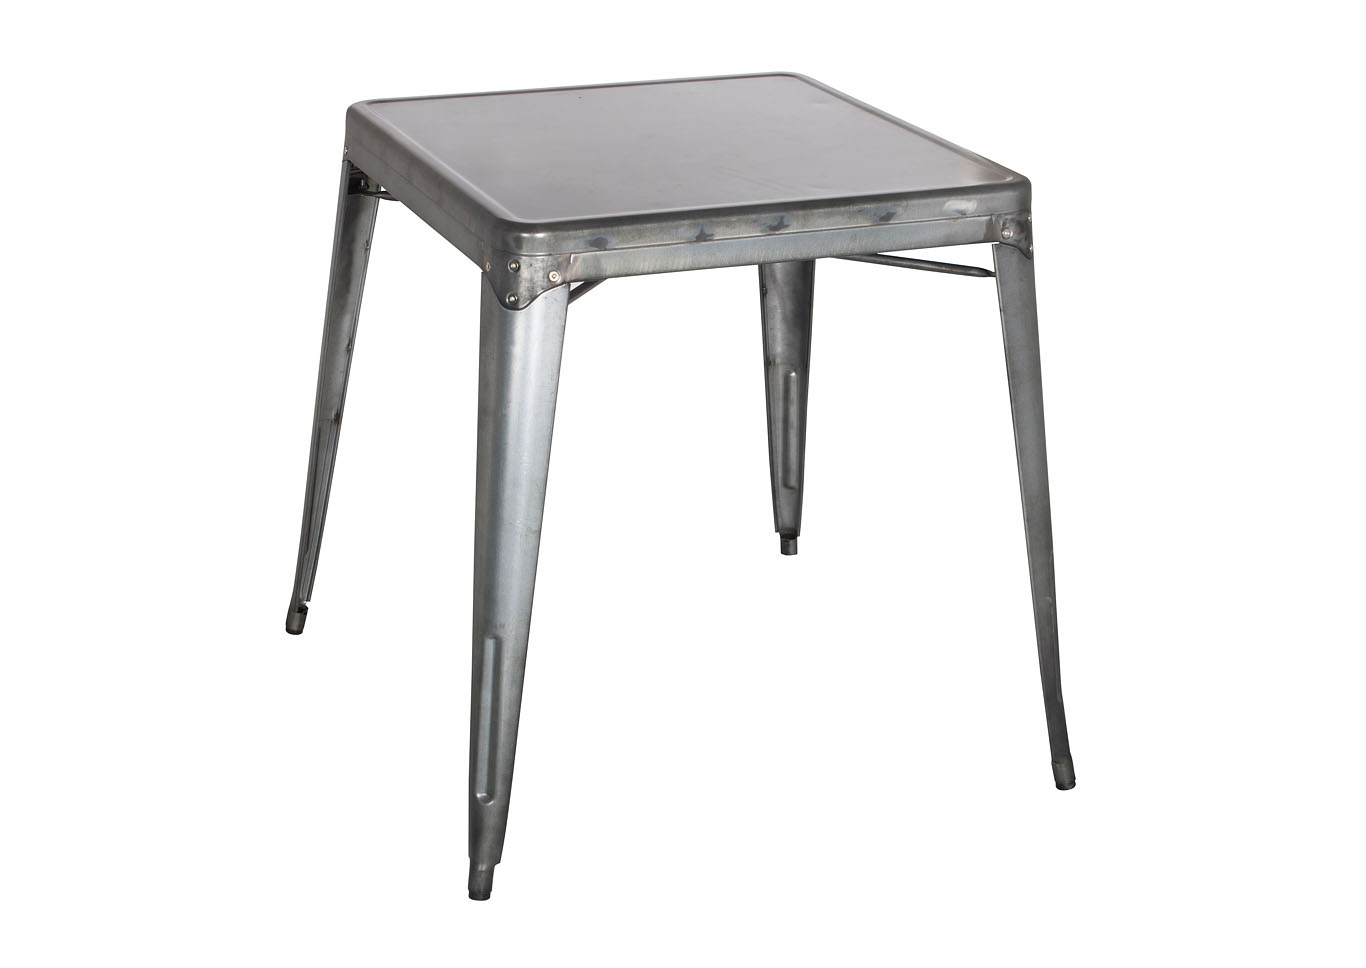 Gunmetal Galvanized Steel Dining Table,Chintaly Imports